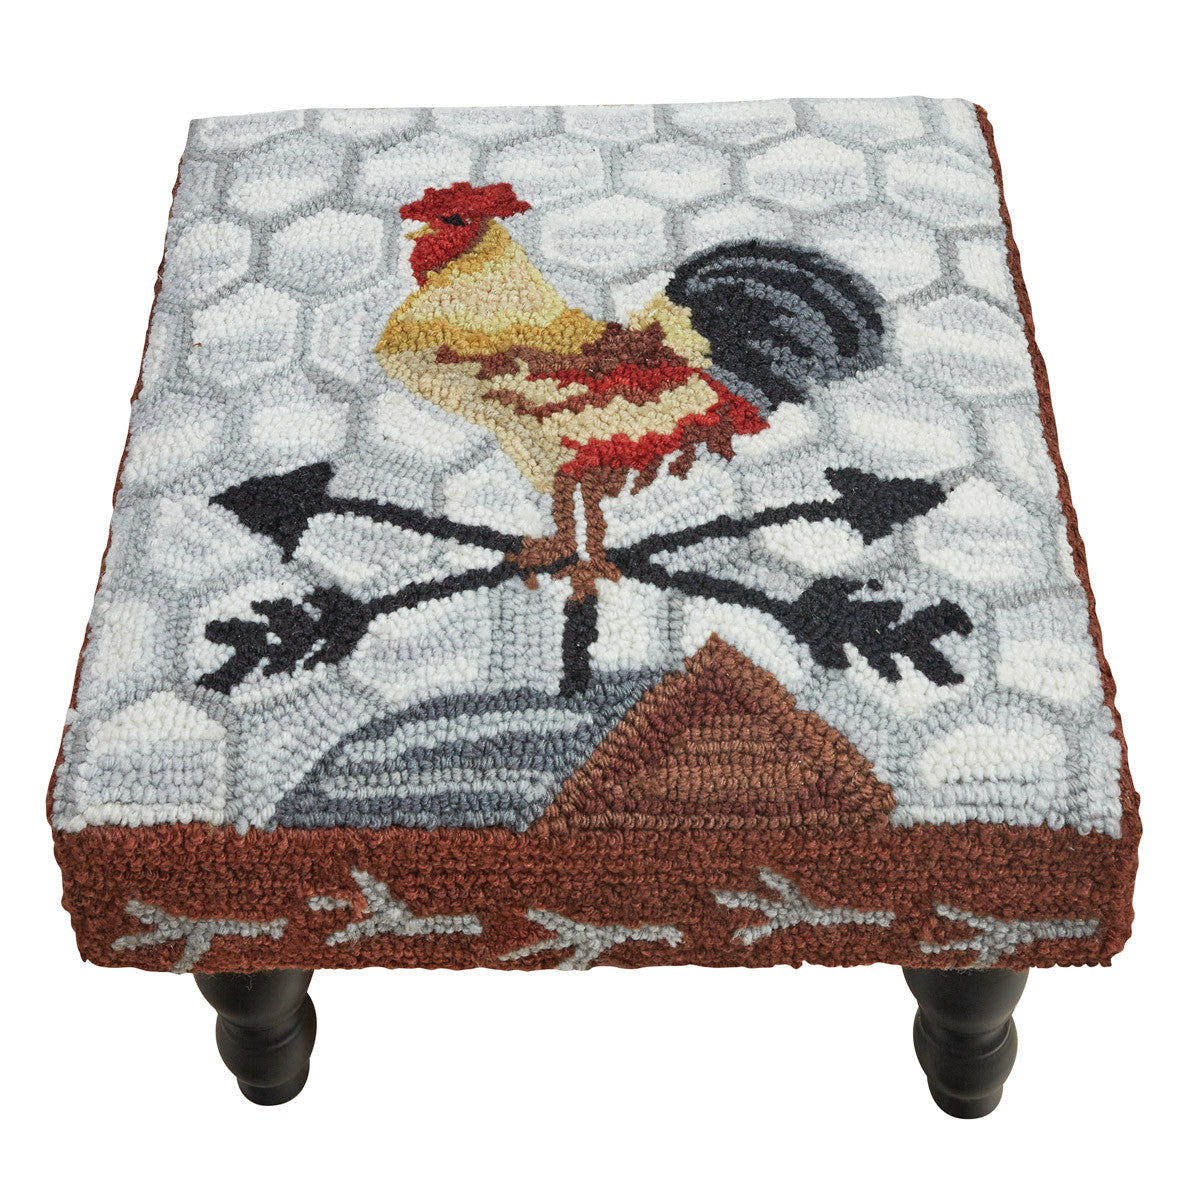 Break Of Day Rooster Hooked Stool - Park Designs